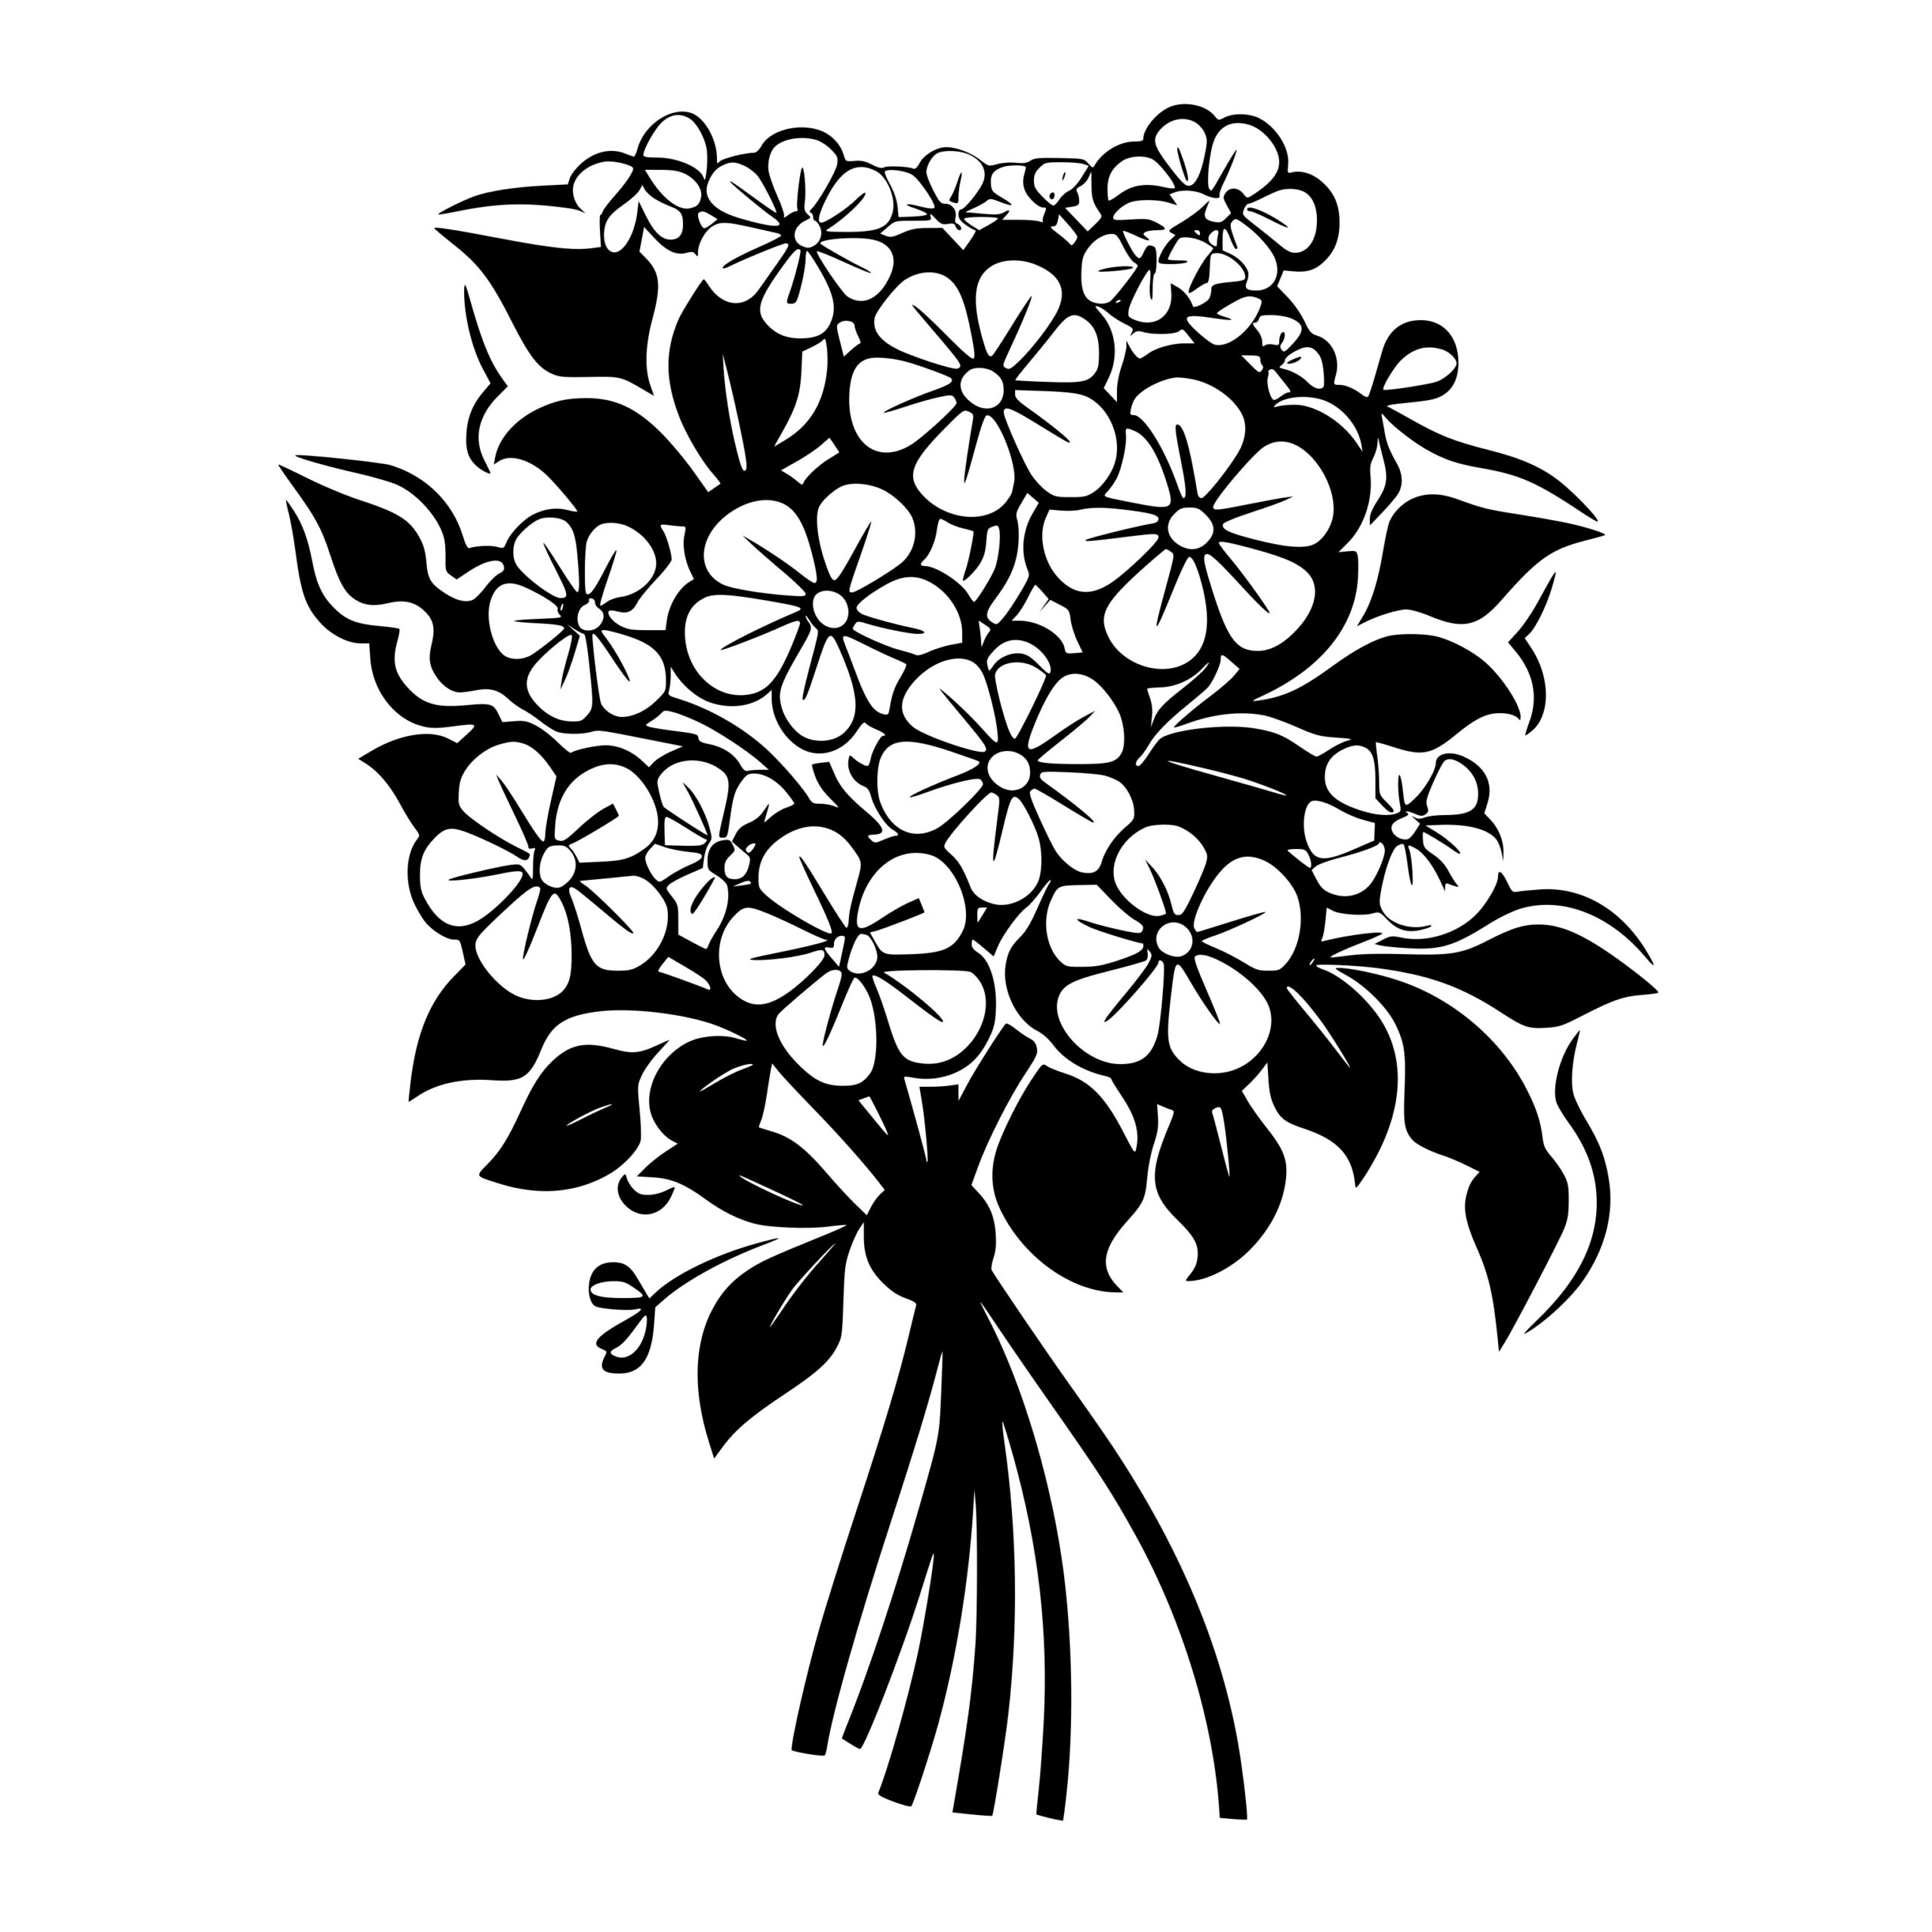 bouquet of flowers clipart black and white